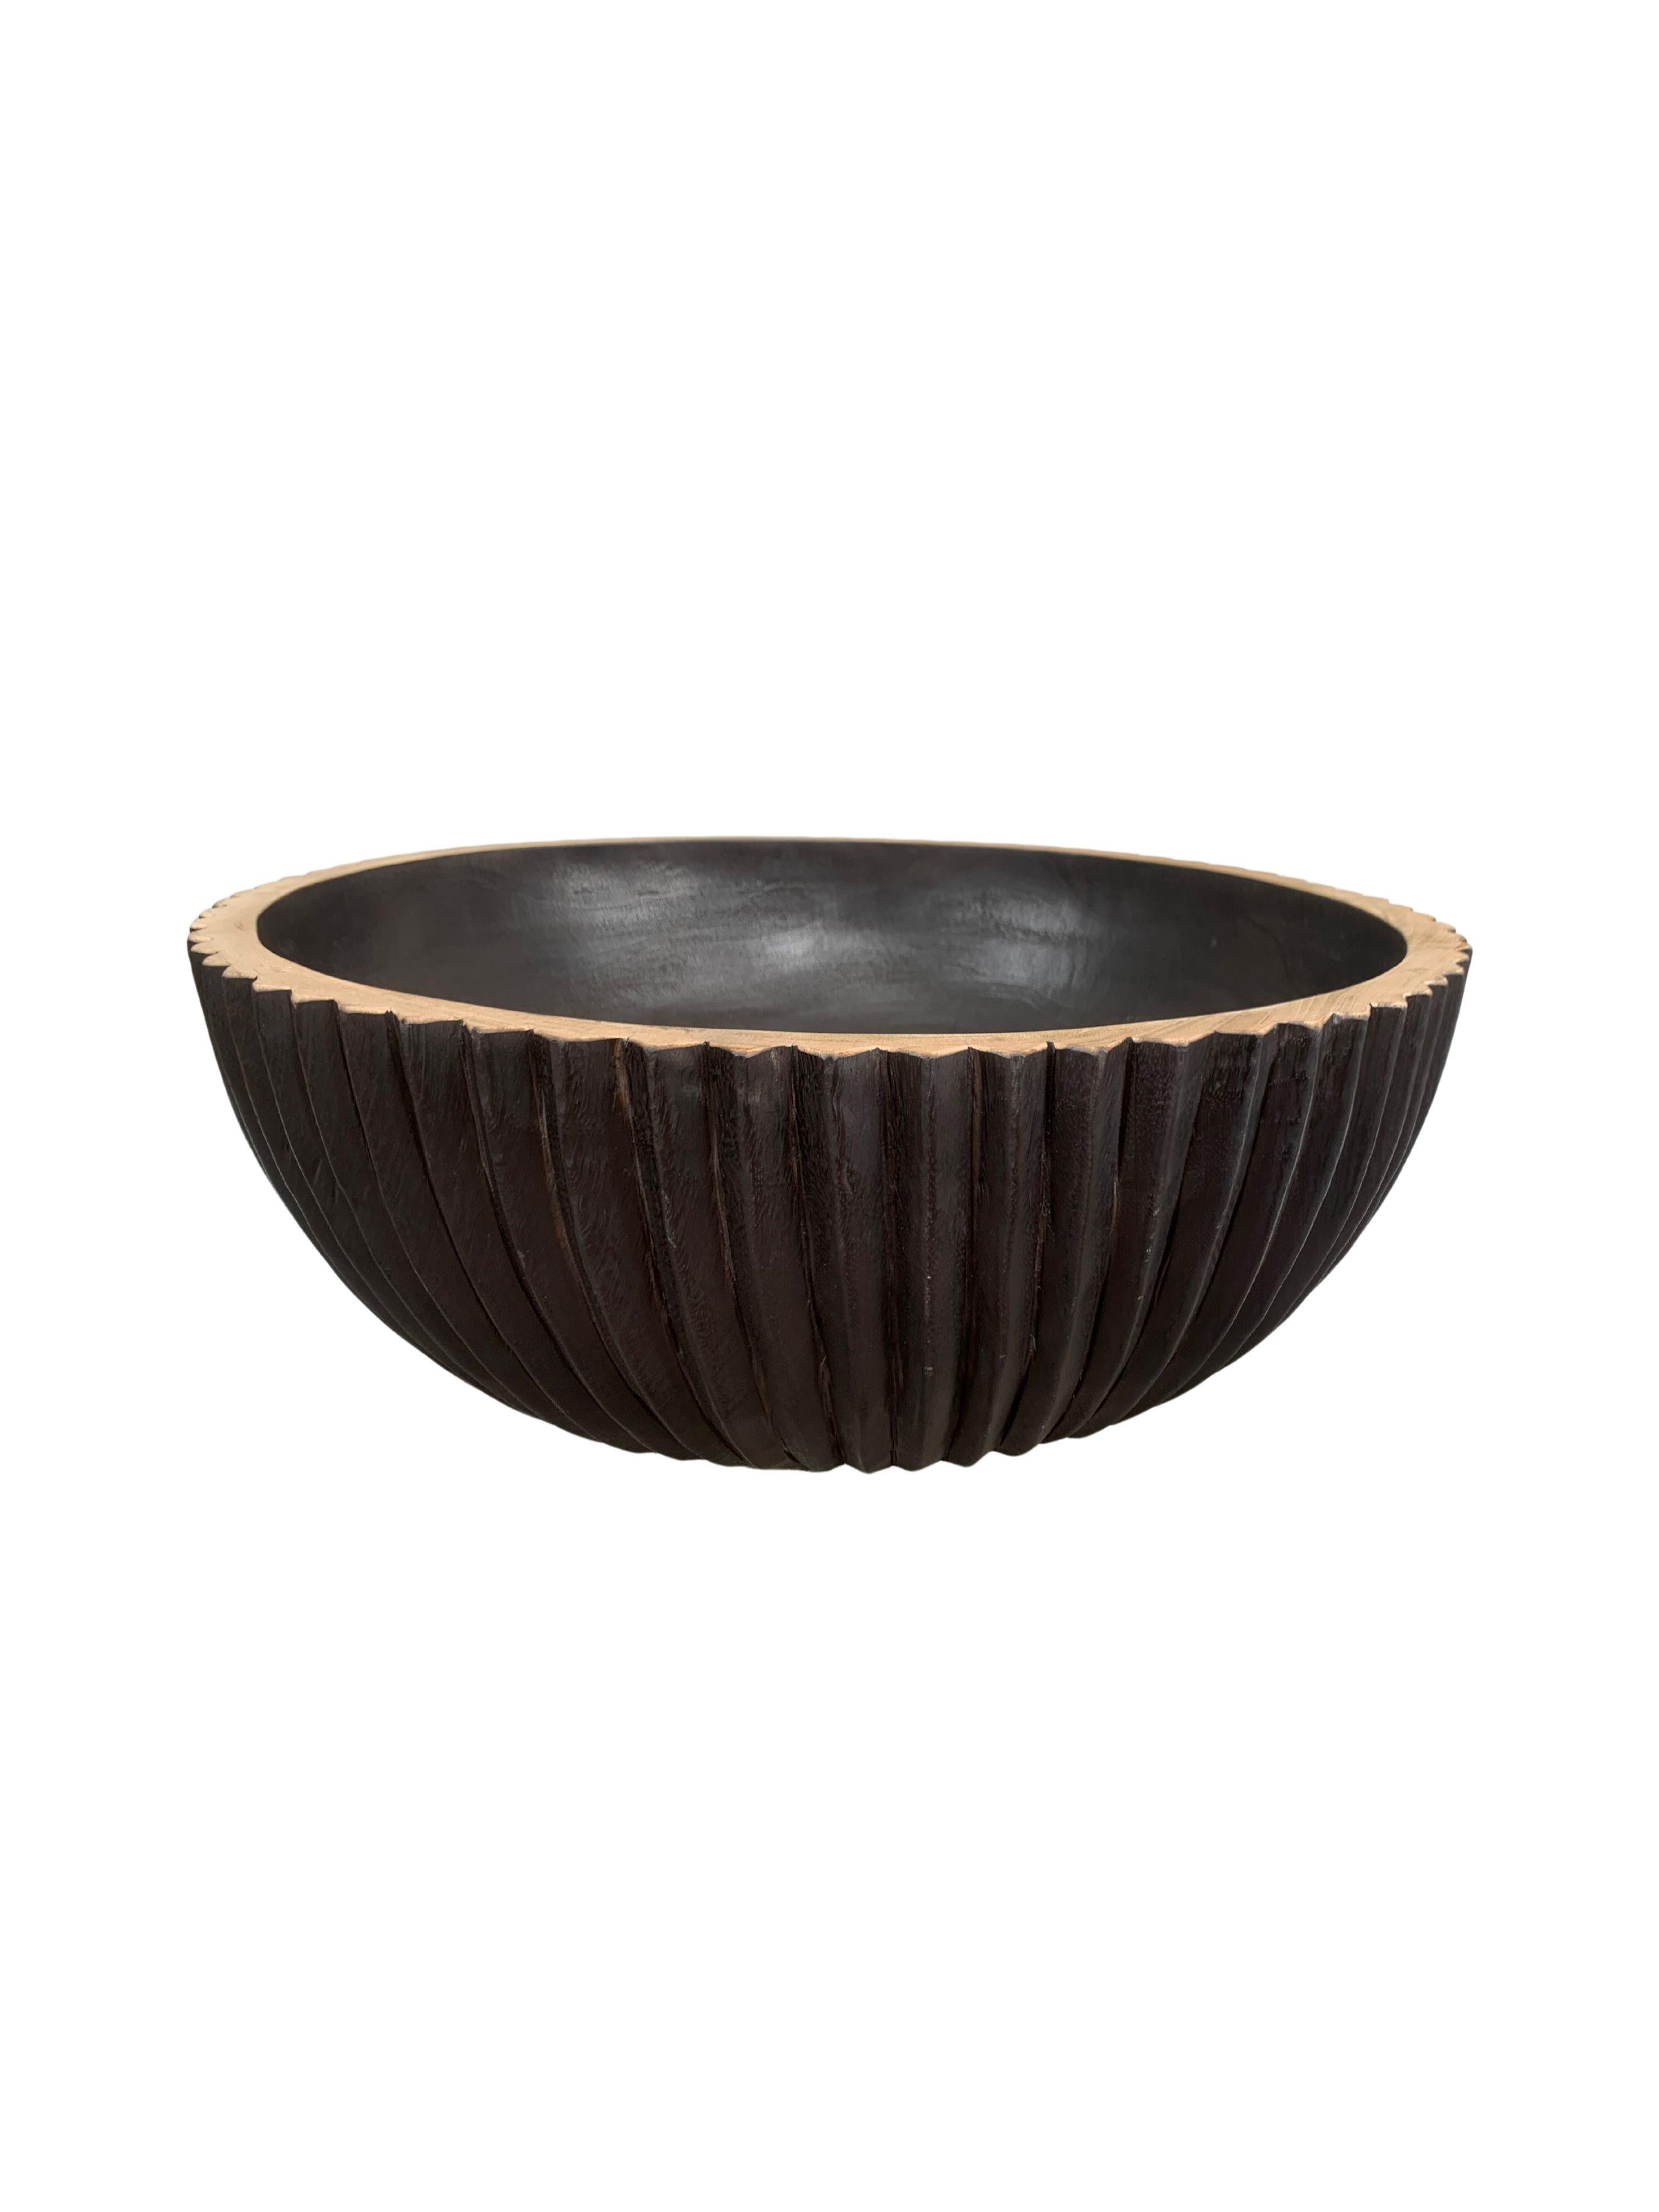 A hand-crafted mango wood bowl. The bowl was cut from a much larger slab of mango wood and features a ribbed texture on its sides. To achieve the rich black colour the bowl was burnt three times and finished with a clear coat. The rim was then